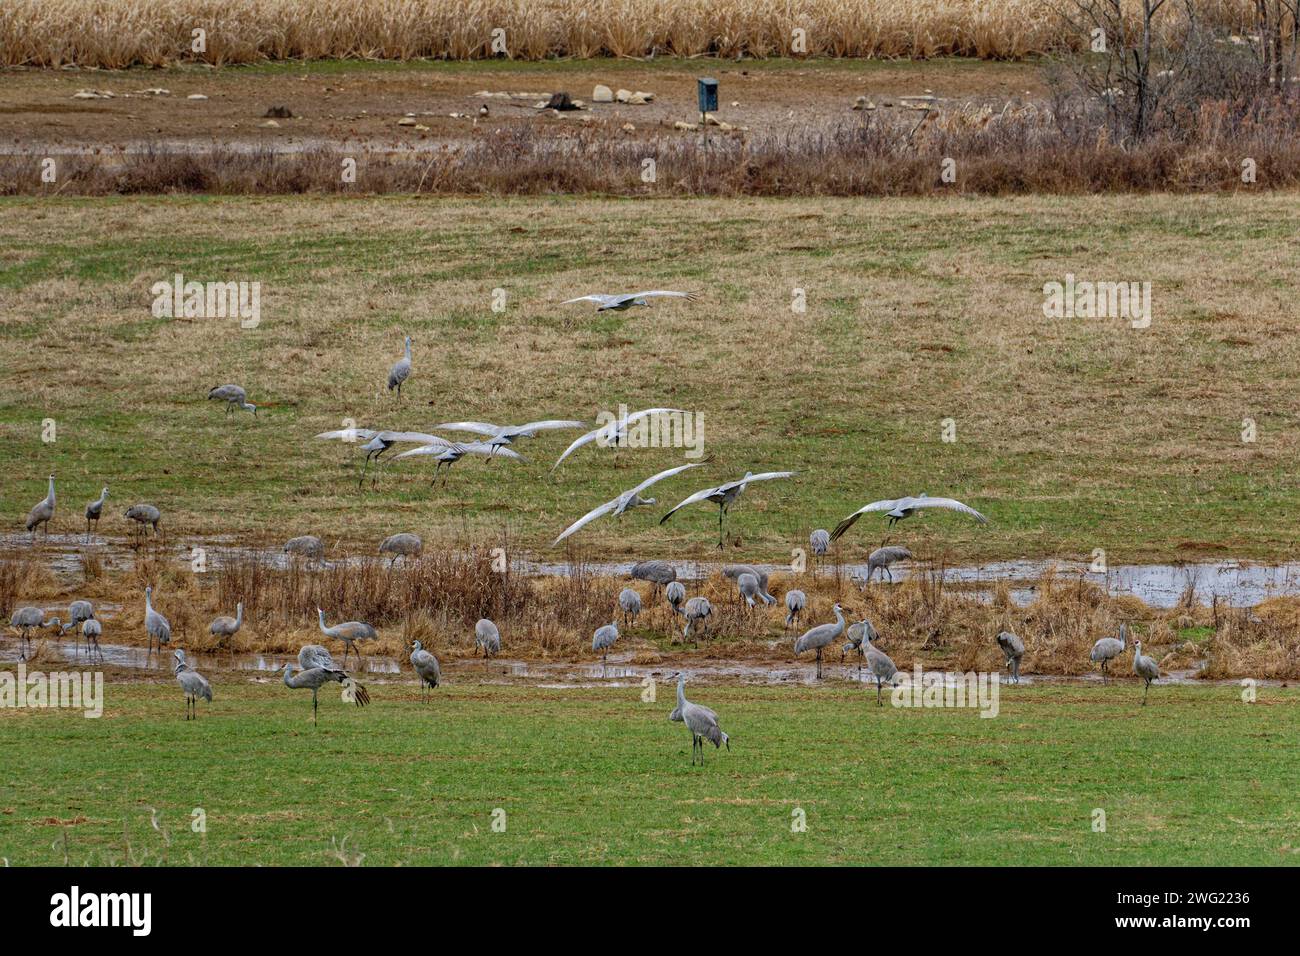 A group of sandhill cranes landing among other cranes in a farm field in a grassy muddy area with water in wintertime Stock Photo